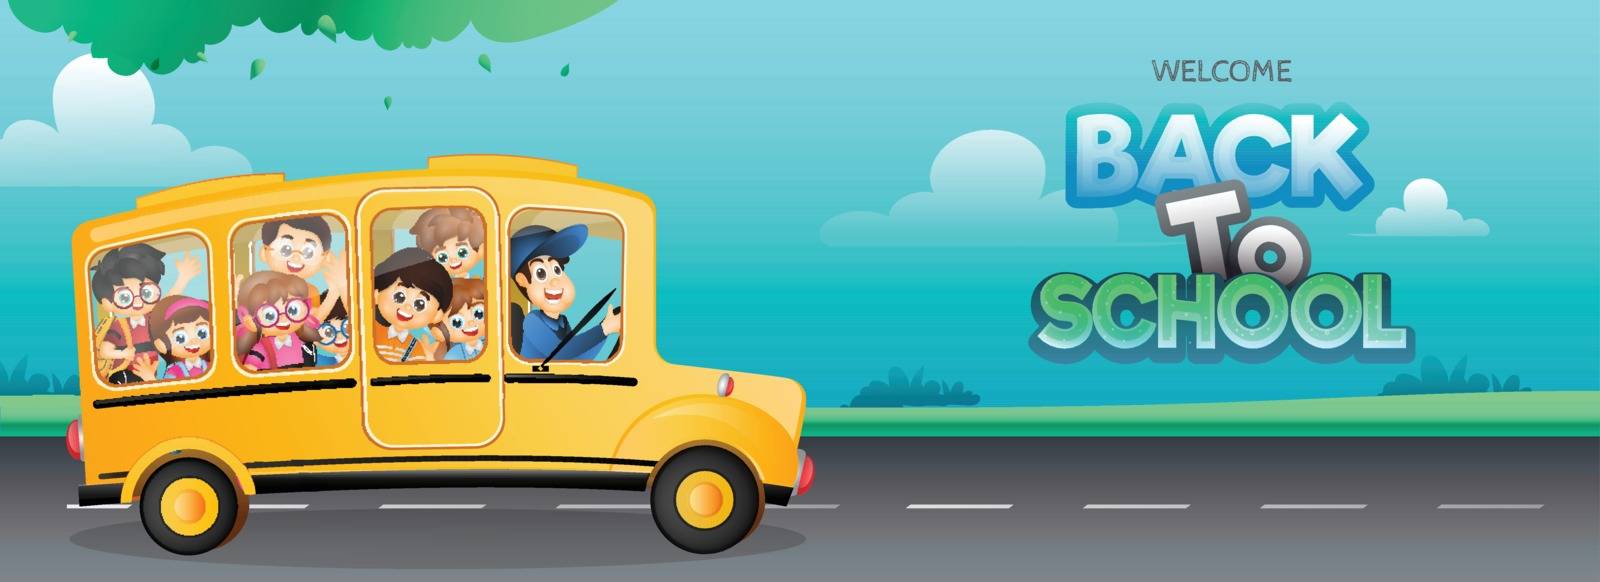 Website header or banner design with illustration of students going to school by bus for Welcome Back to School concept.